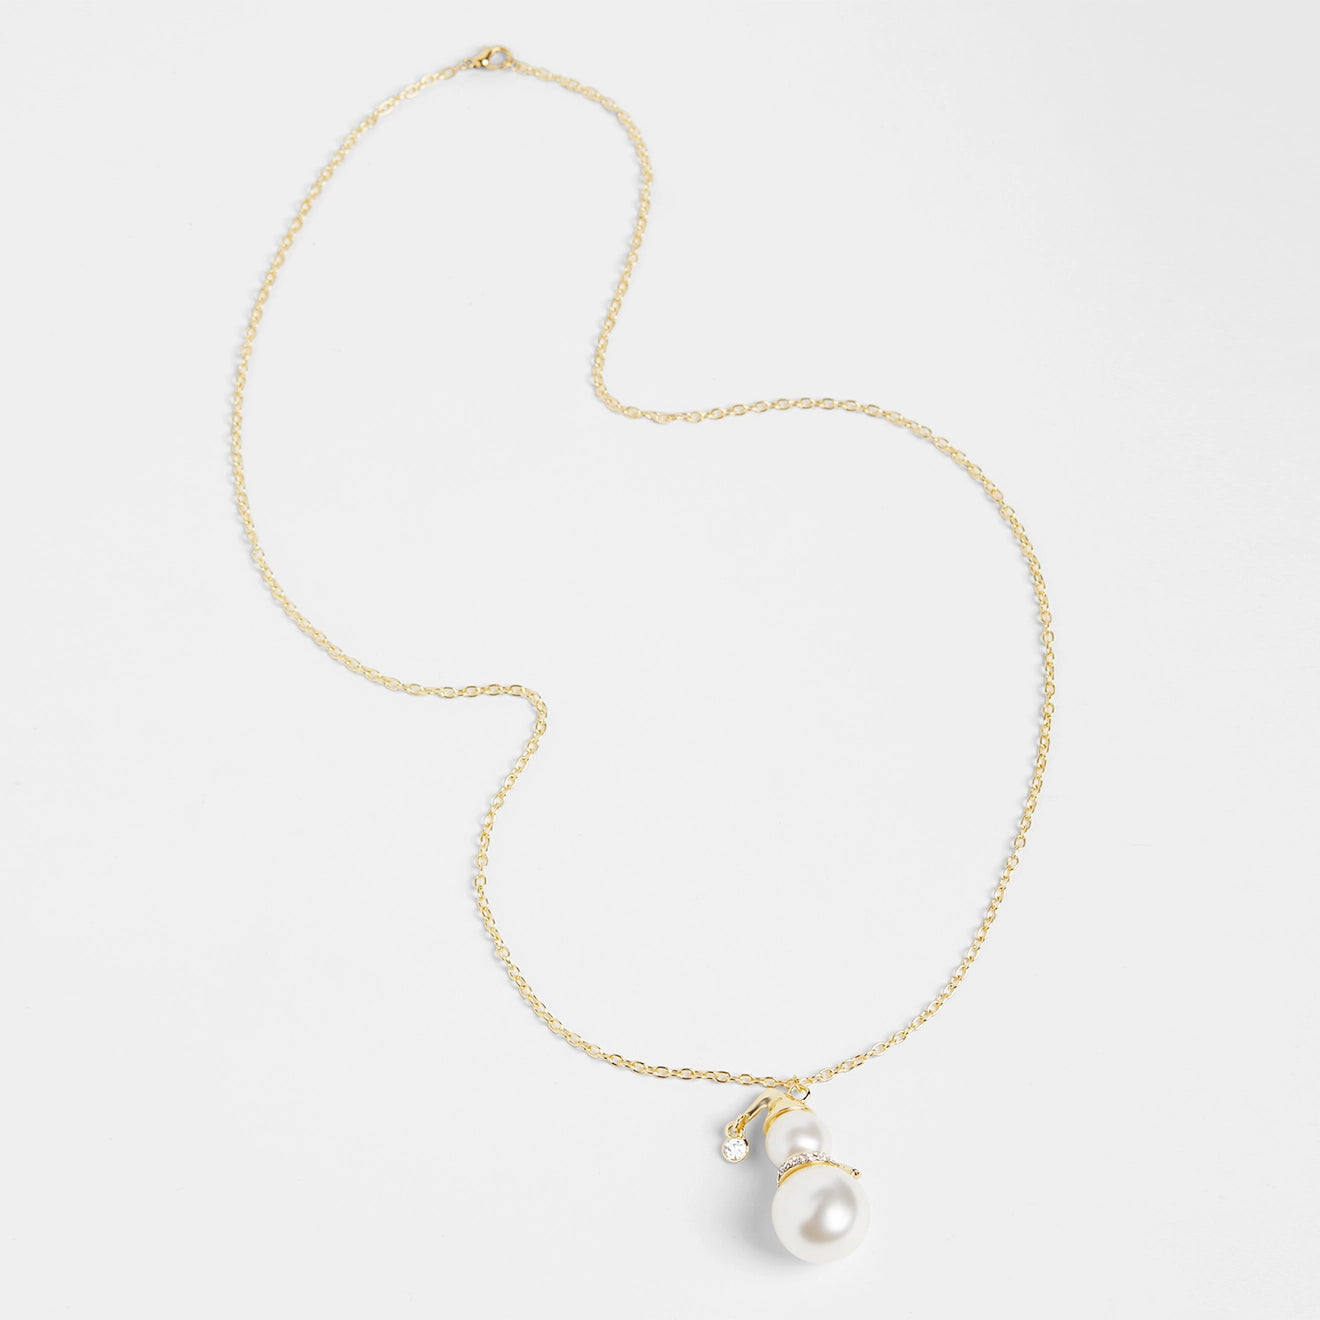 Pearl Snowman Necklace - 2 Styles